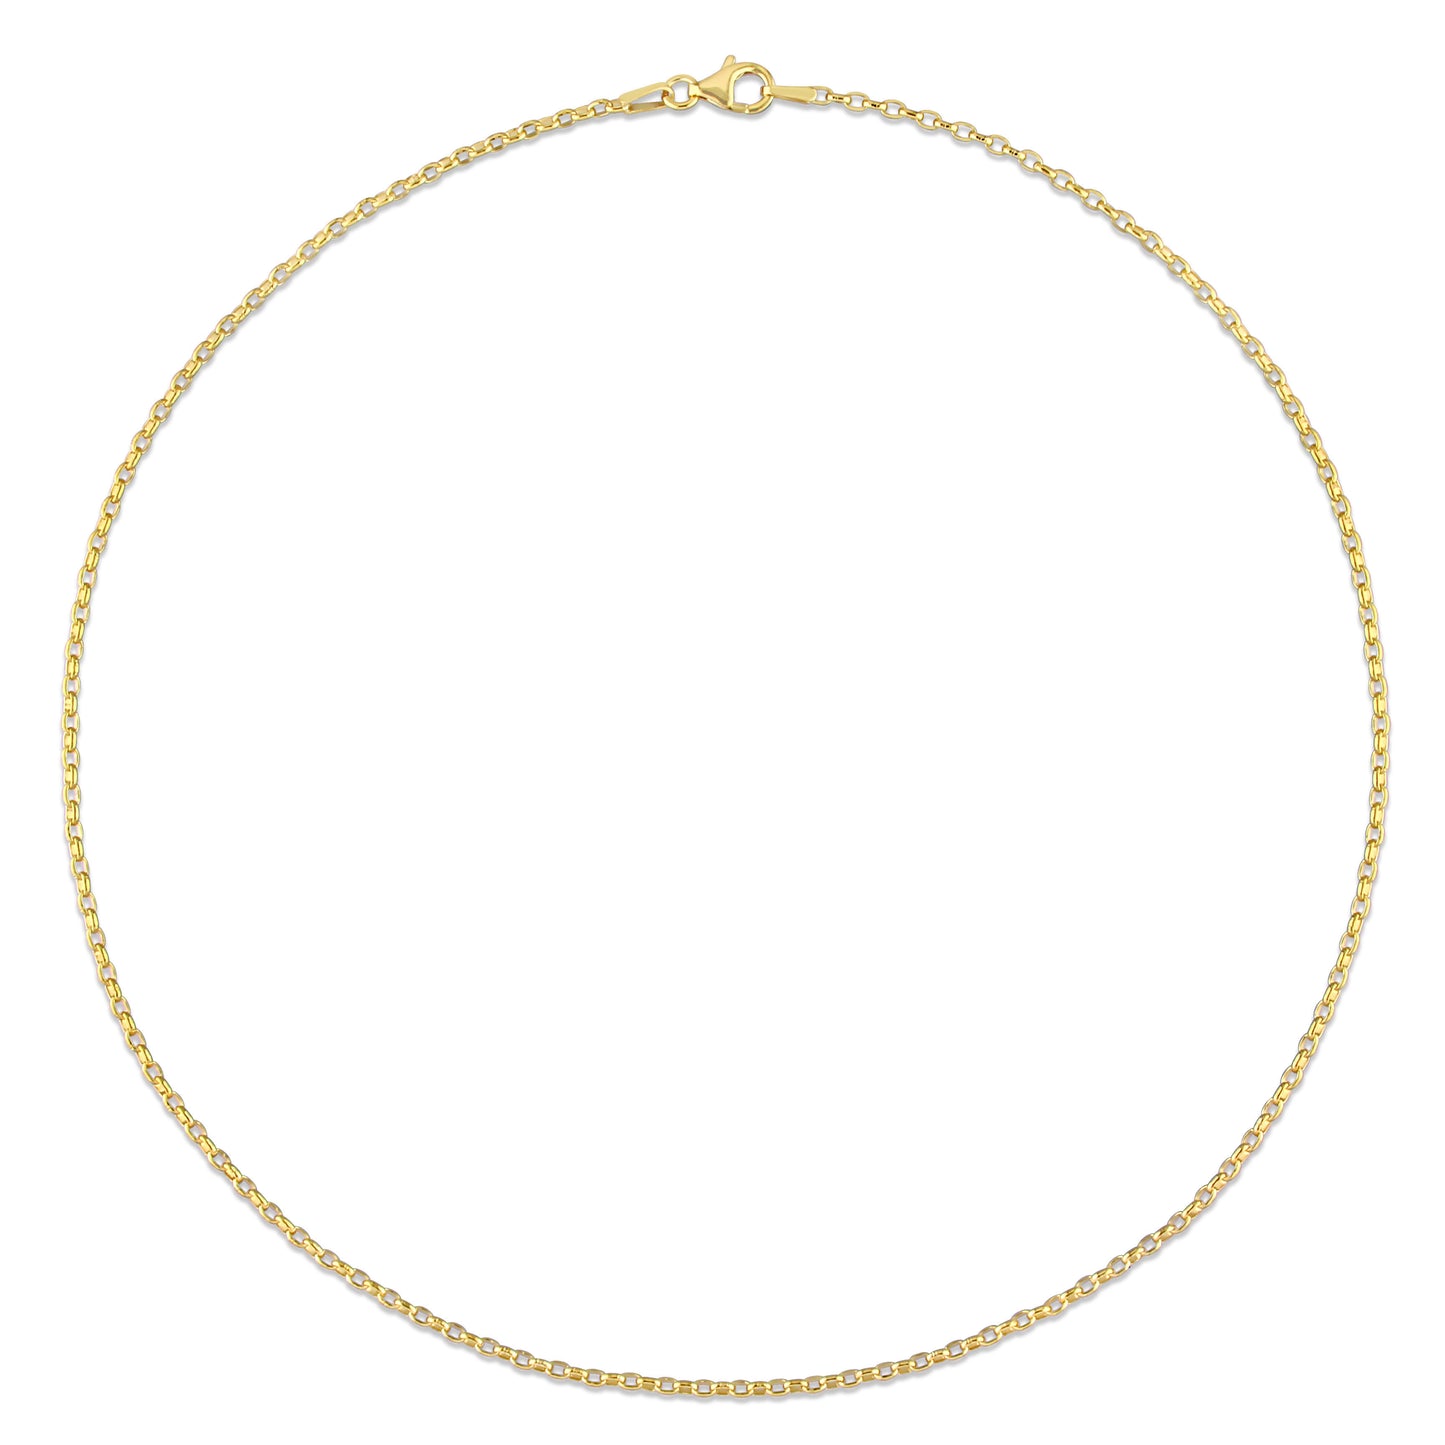 18k Yellow Gold Plated Rolo Chain in 1.8mm